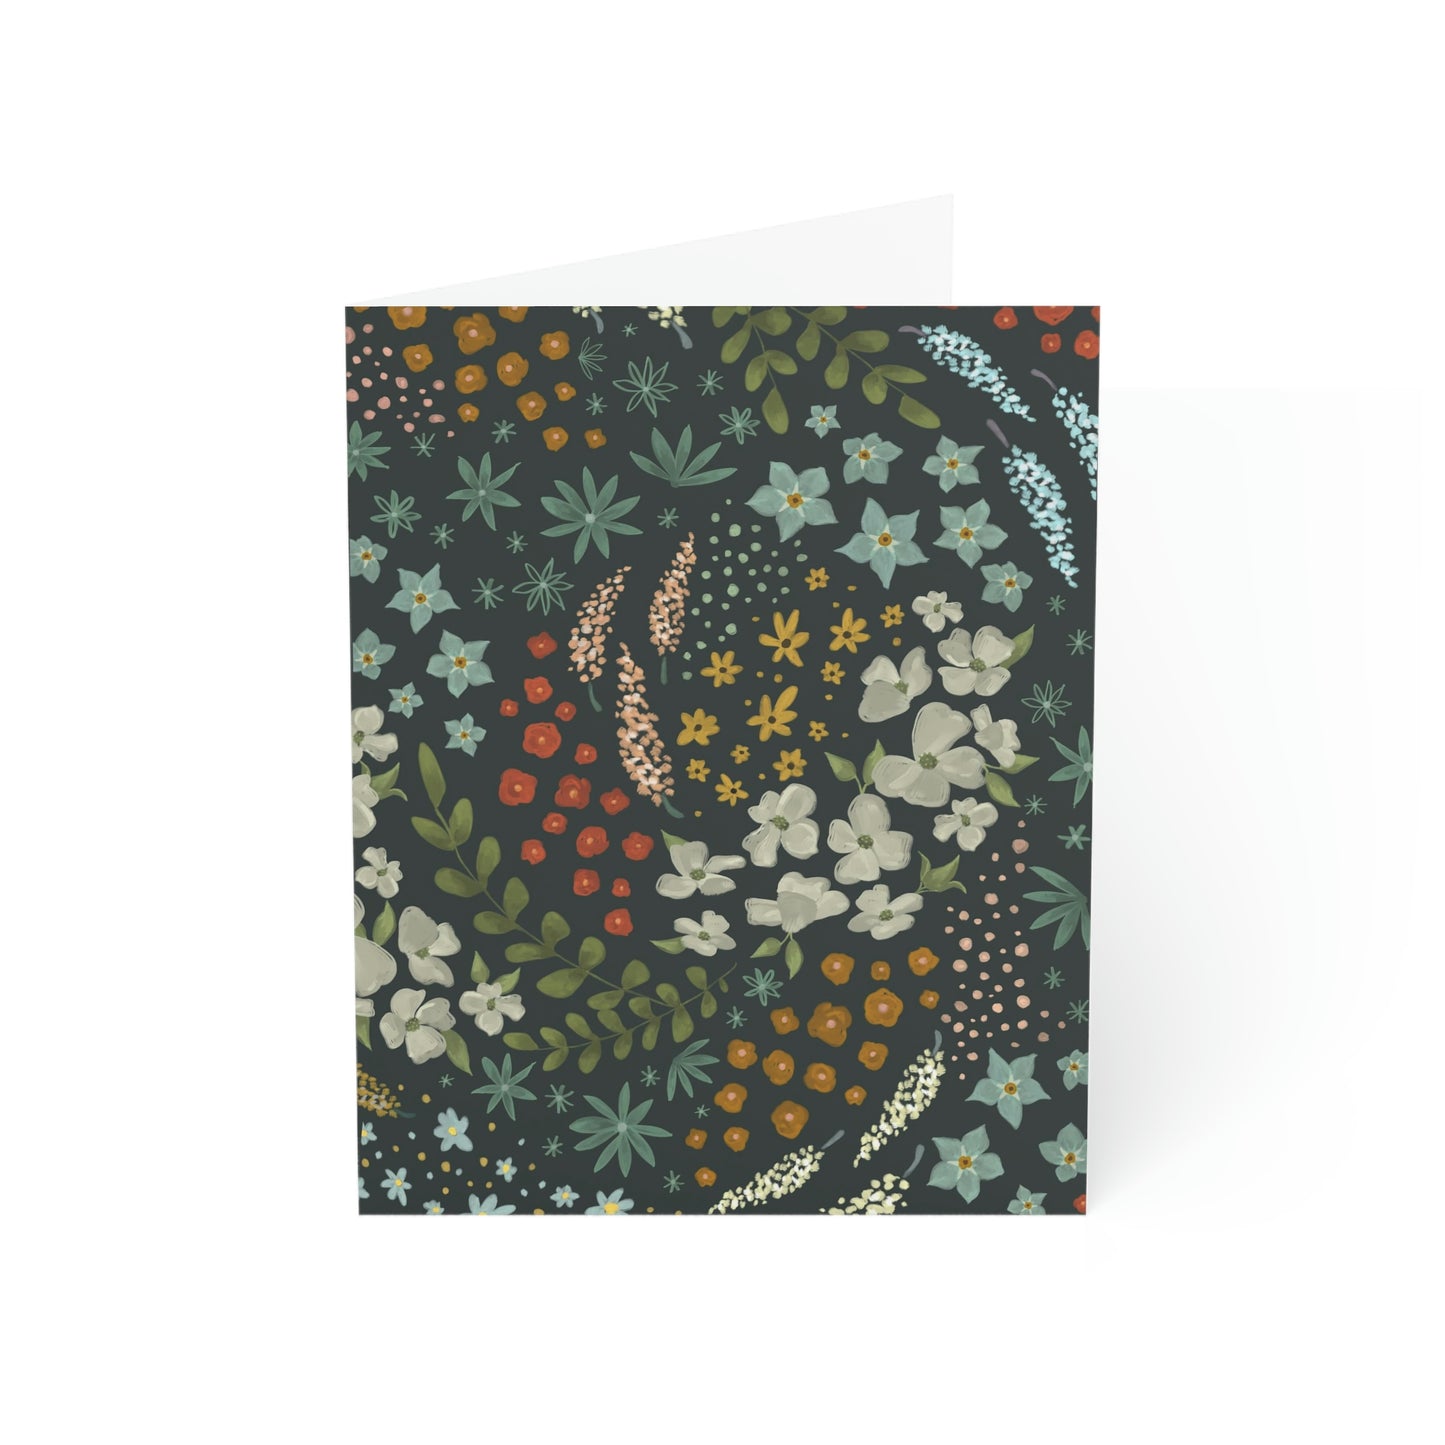 Dark Floral Greeting Cards (1, 10, 30, and 50pcs)